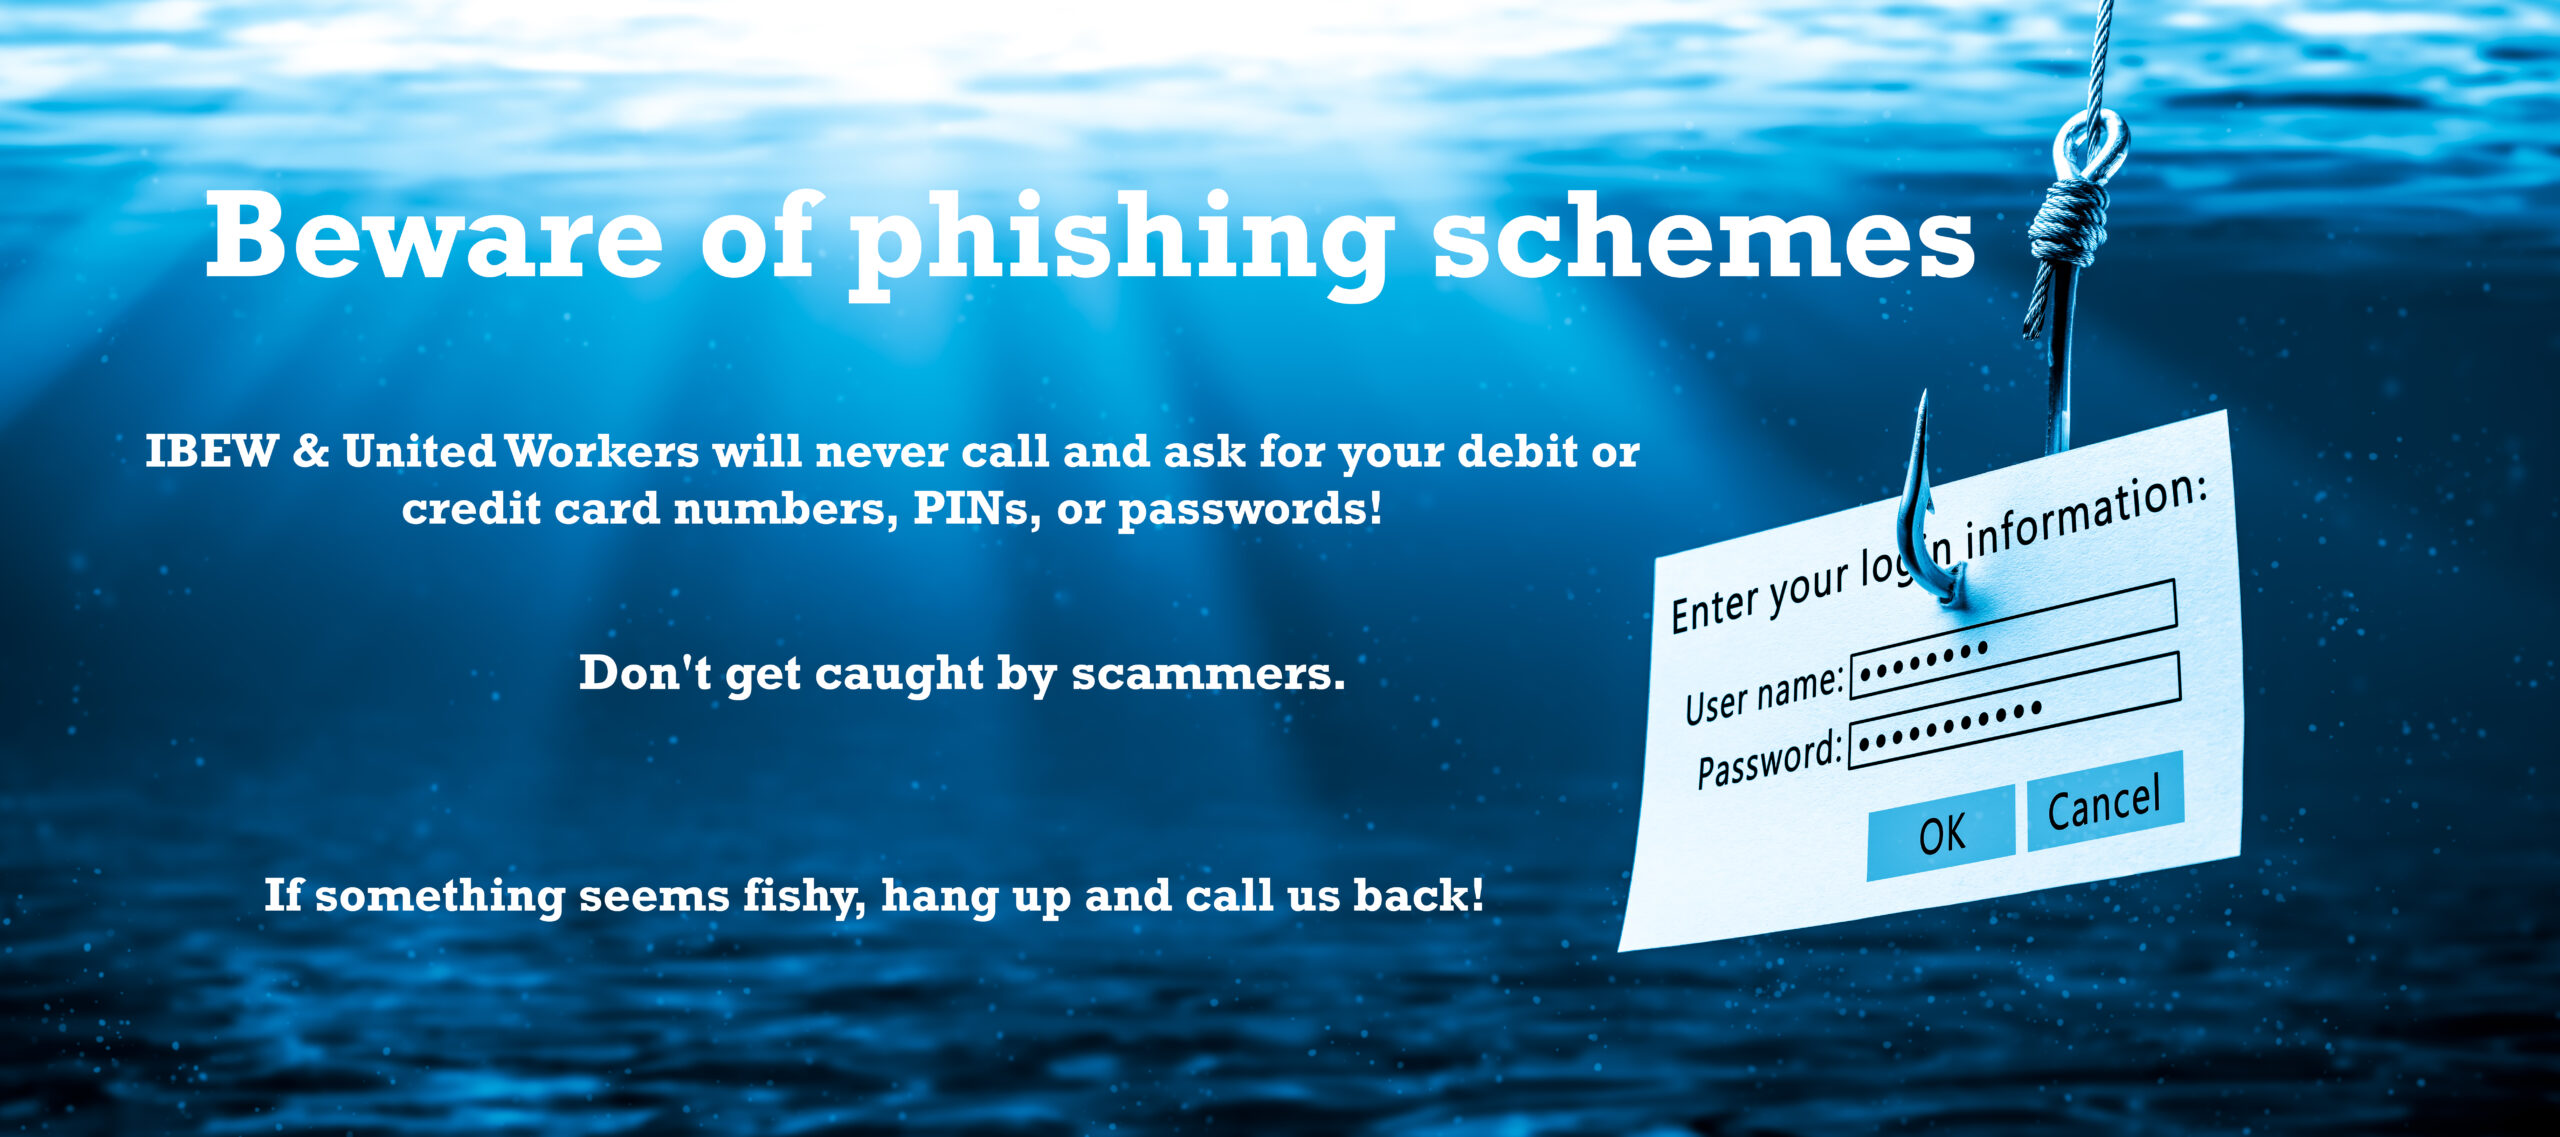 Underwater scene with a login screen caught on a fish hook. Text says " Beware of phishing schemes. IBEW & United Workers will never call and ask for your debit or credit card numbers, PINs, or passwords! Don't get caught by scammers. If something seems fishy, hang up and call us back!"